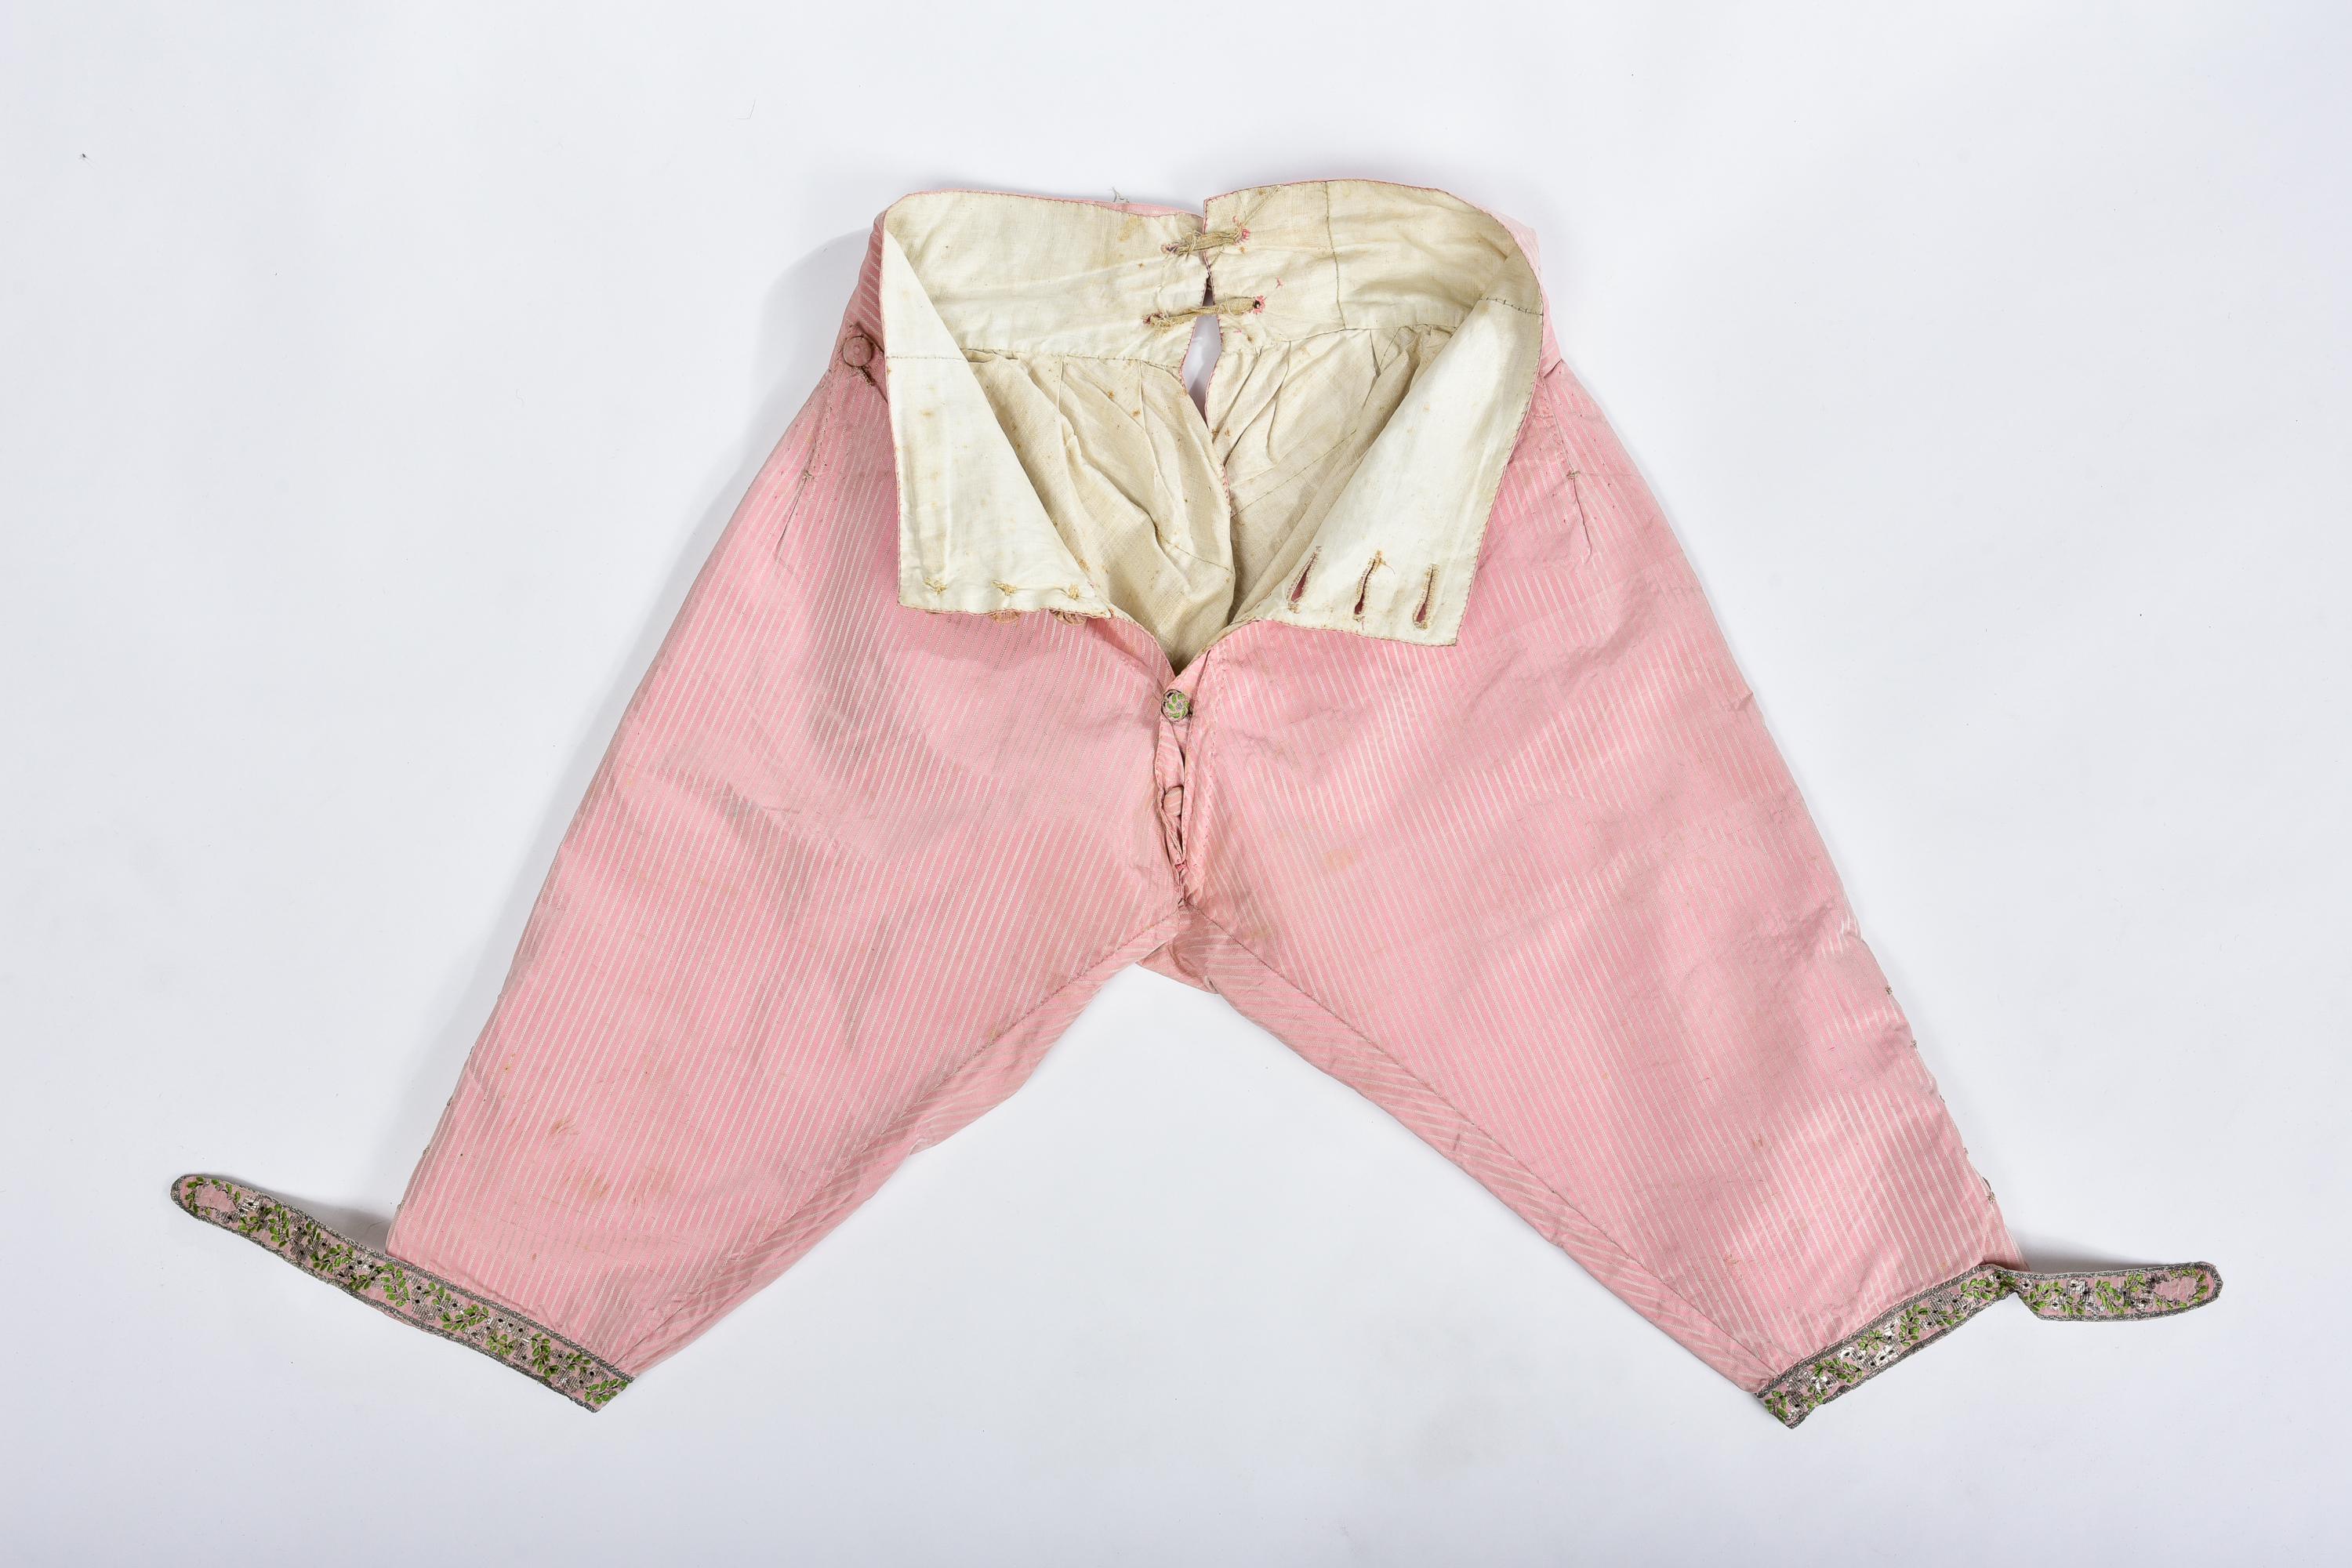 Circa 1780
France

Beautiful pink pekin silk breeches with white chevron stripes, probably for the Court. Rare model with buttoned fly complete with its buttons and one visible one is brocaded in coloured silk. Knee tabs in silver lamé brocade and